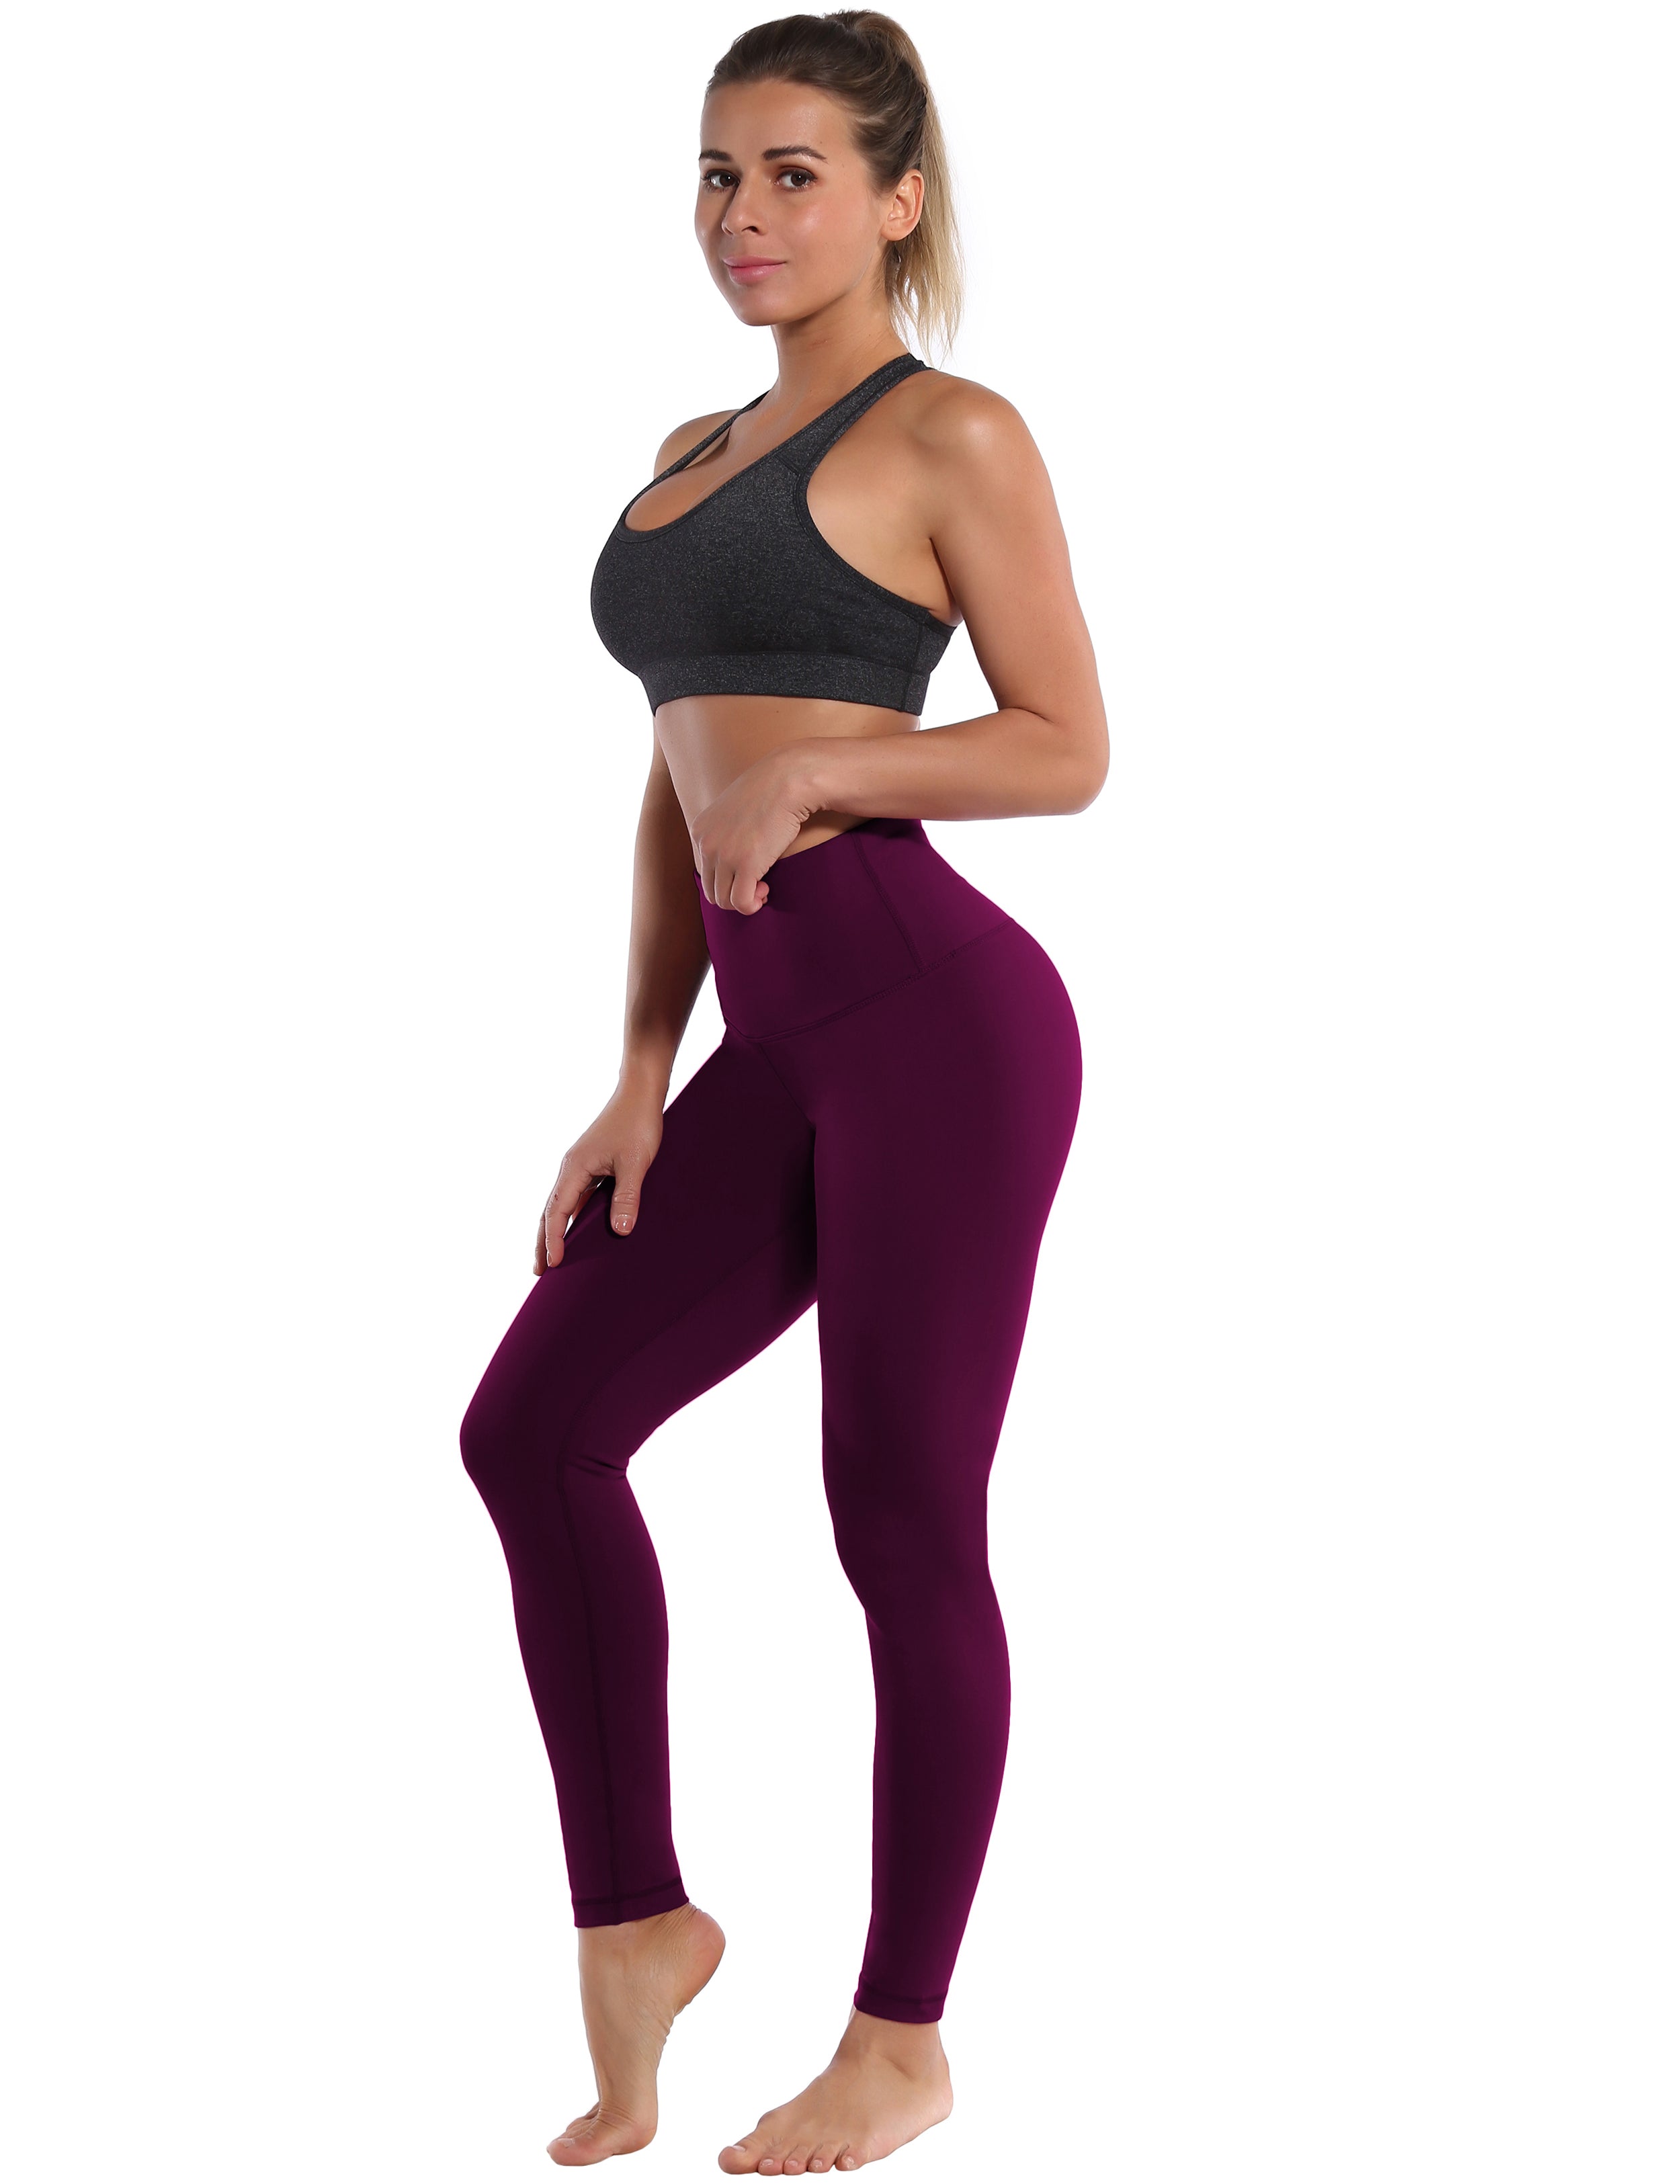 High Waist Pilates Pants grapevine 75%Nylon/25%Spandex Fabric doesn't attract lint easily 4-way stretch No see-through Moisture-wicking Tummy control Inner pocket Four lengths